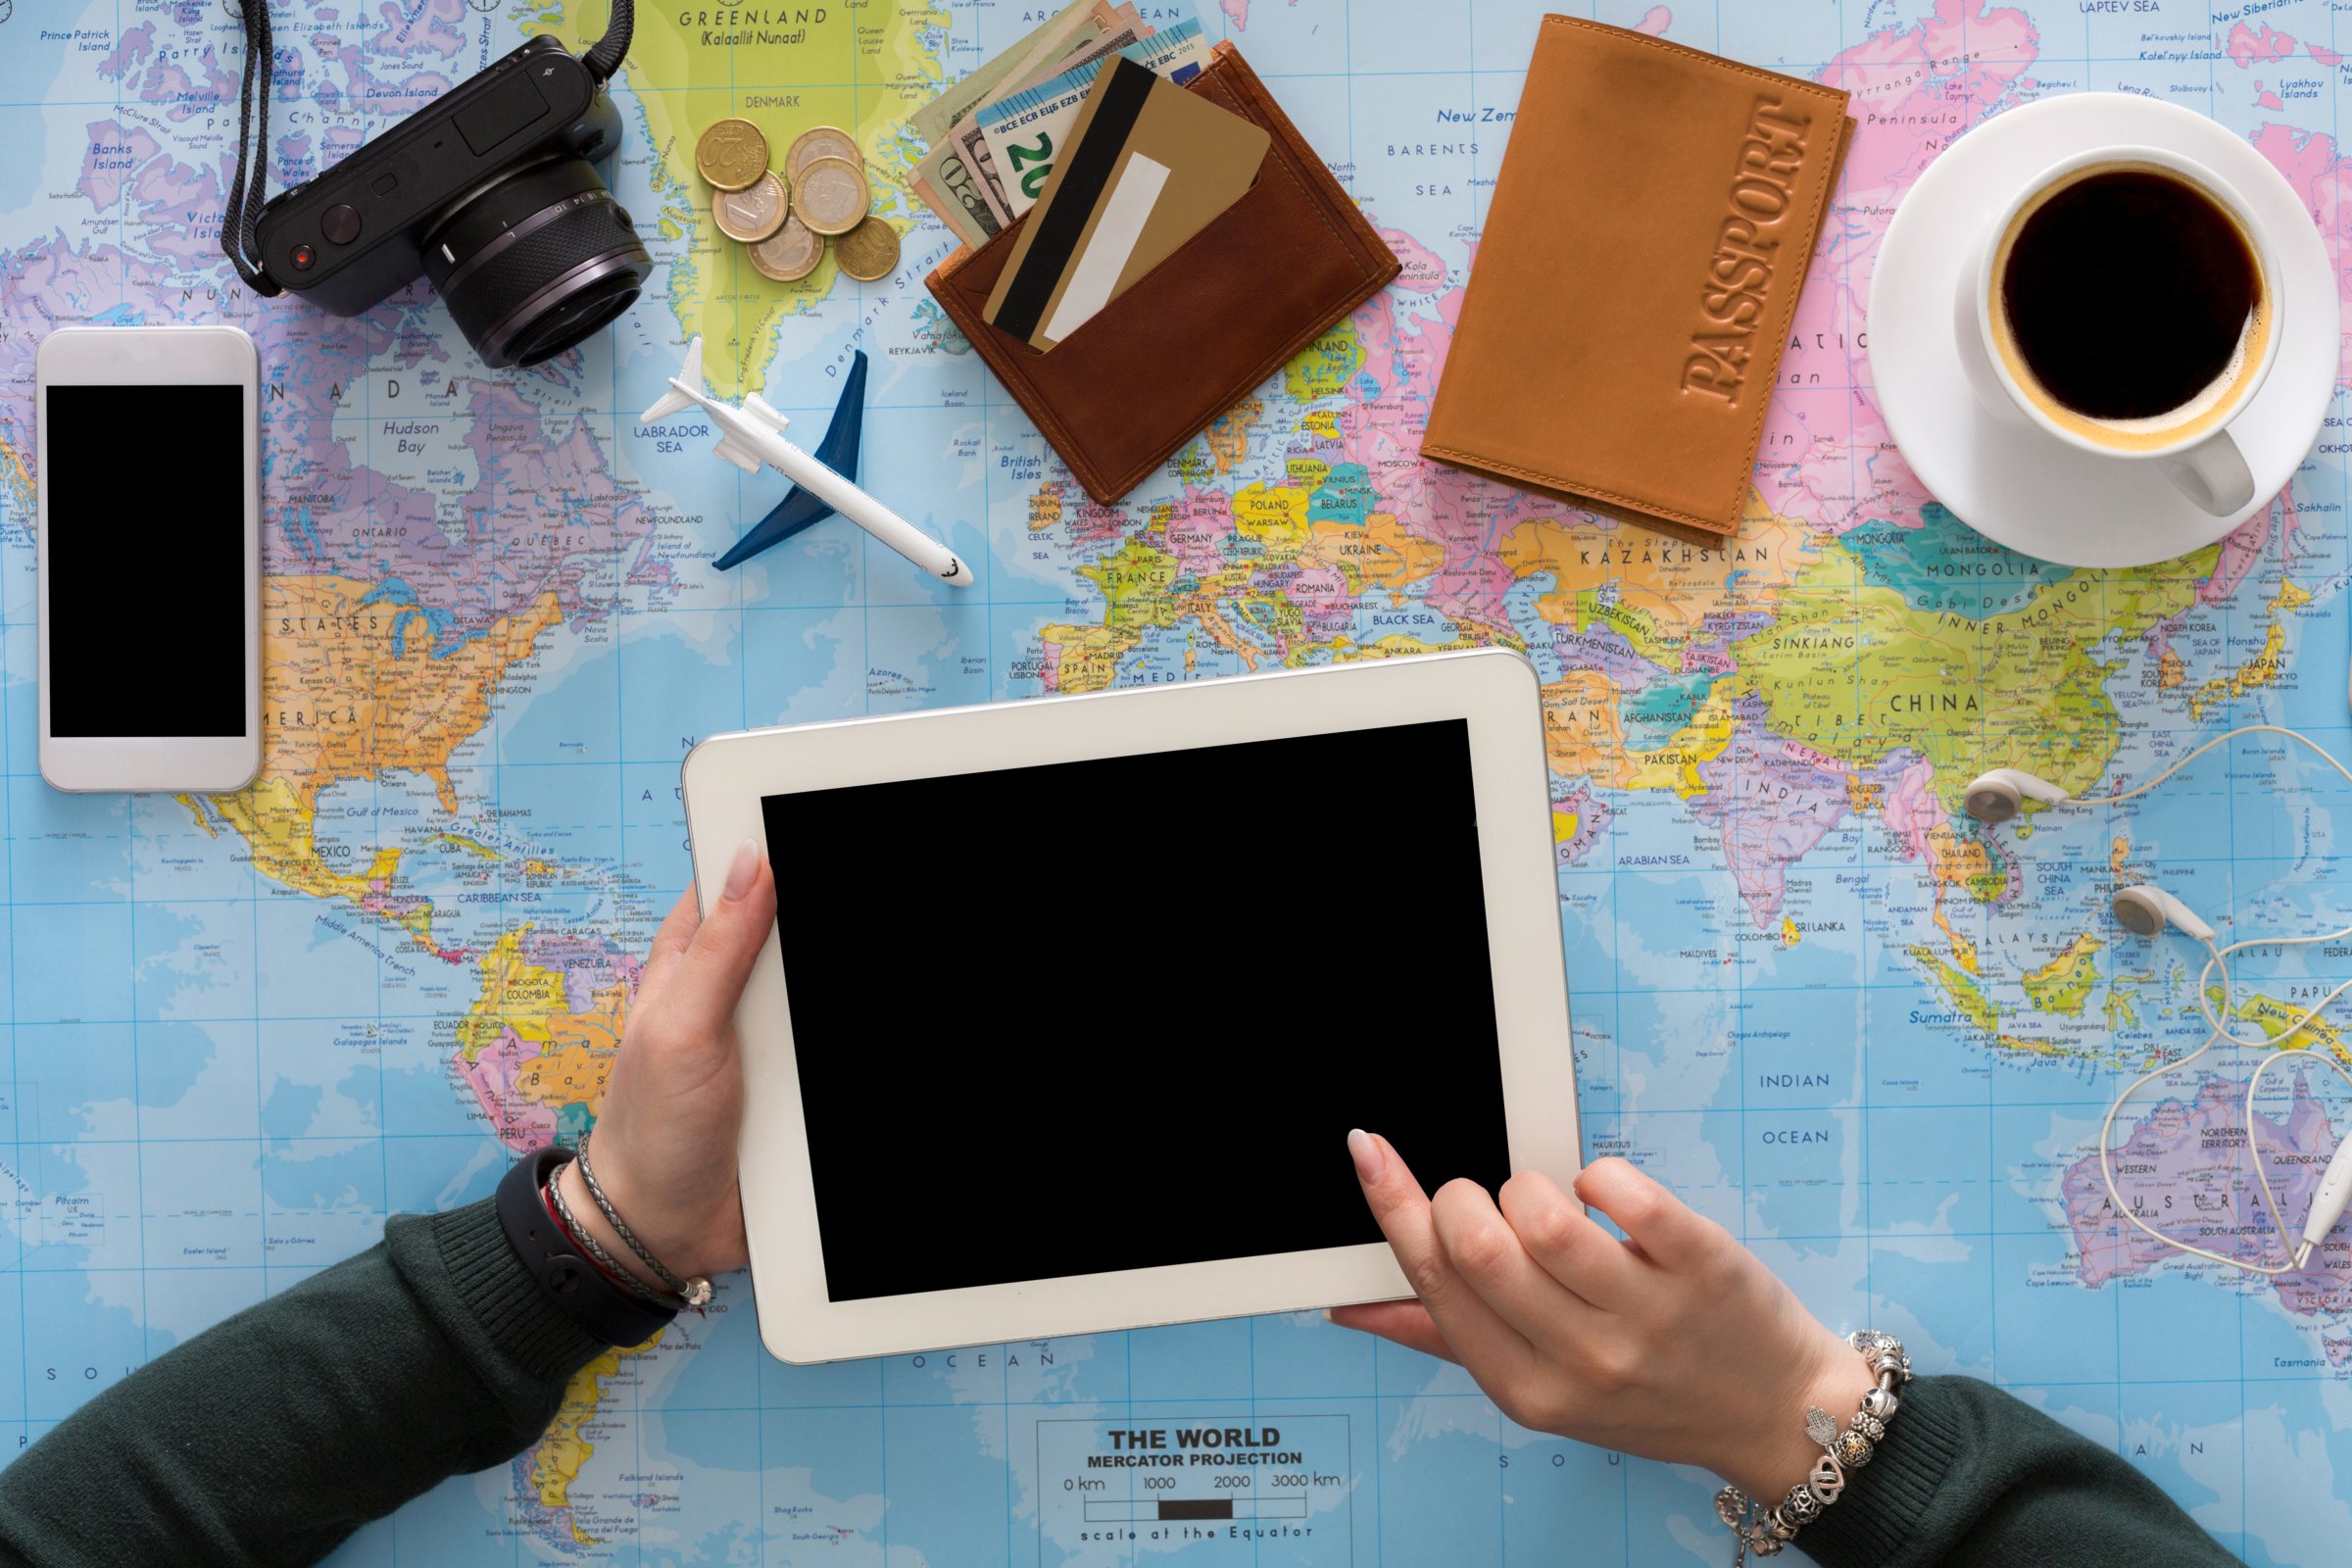 7 Travel and Tech Trends to Look Out for 2020 and Beyond